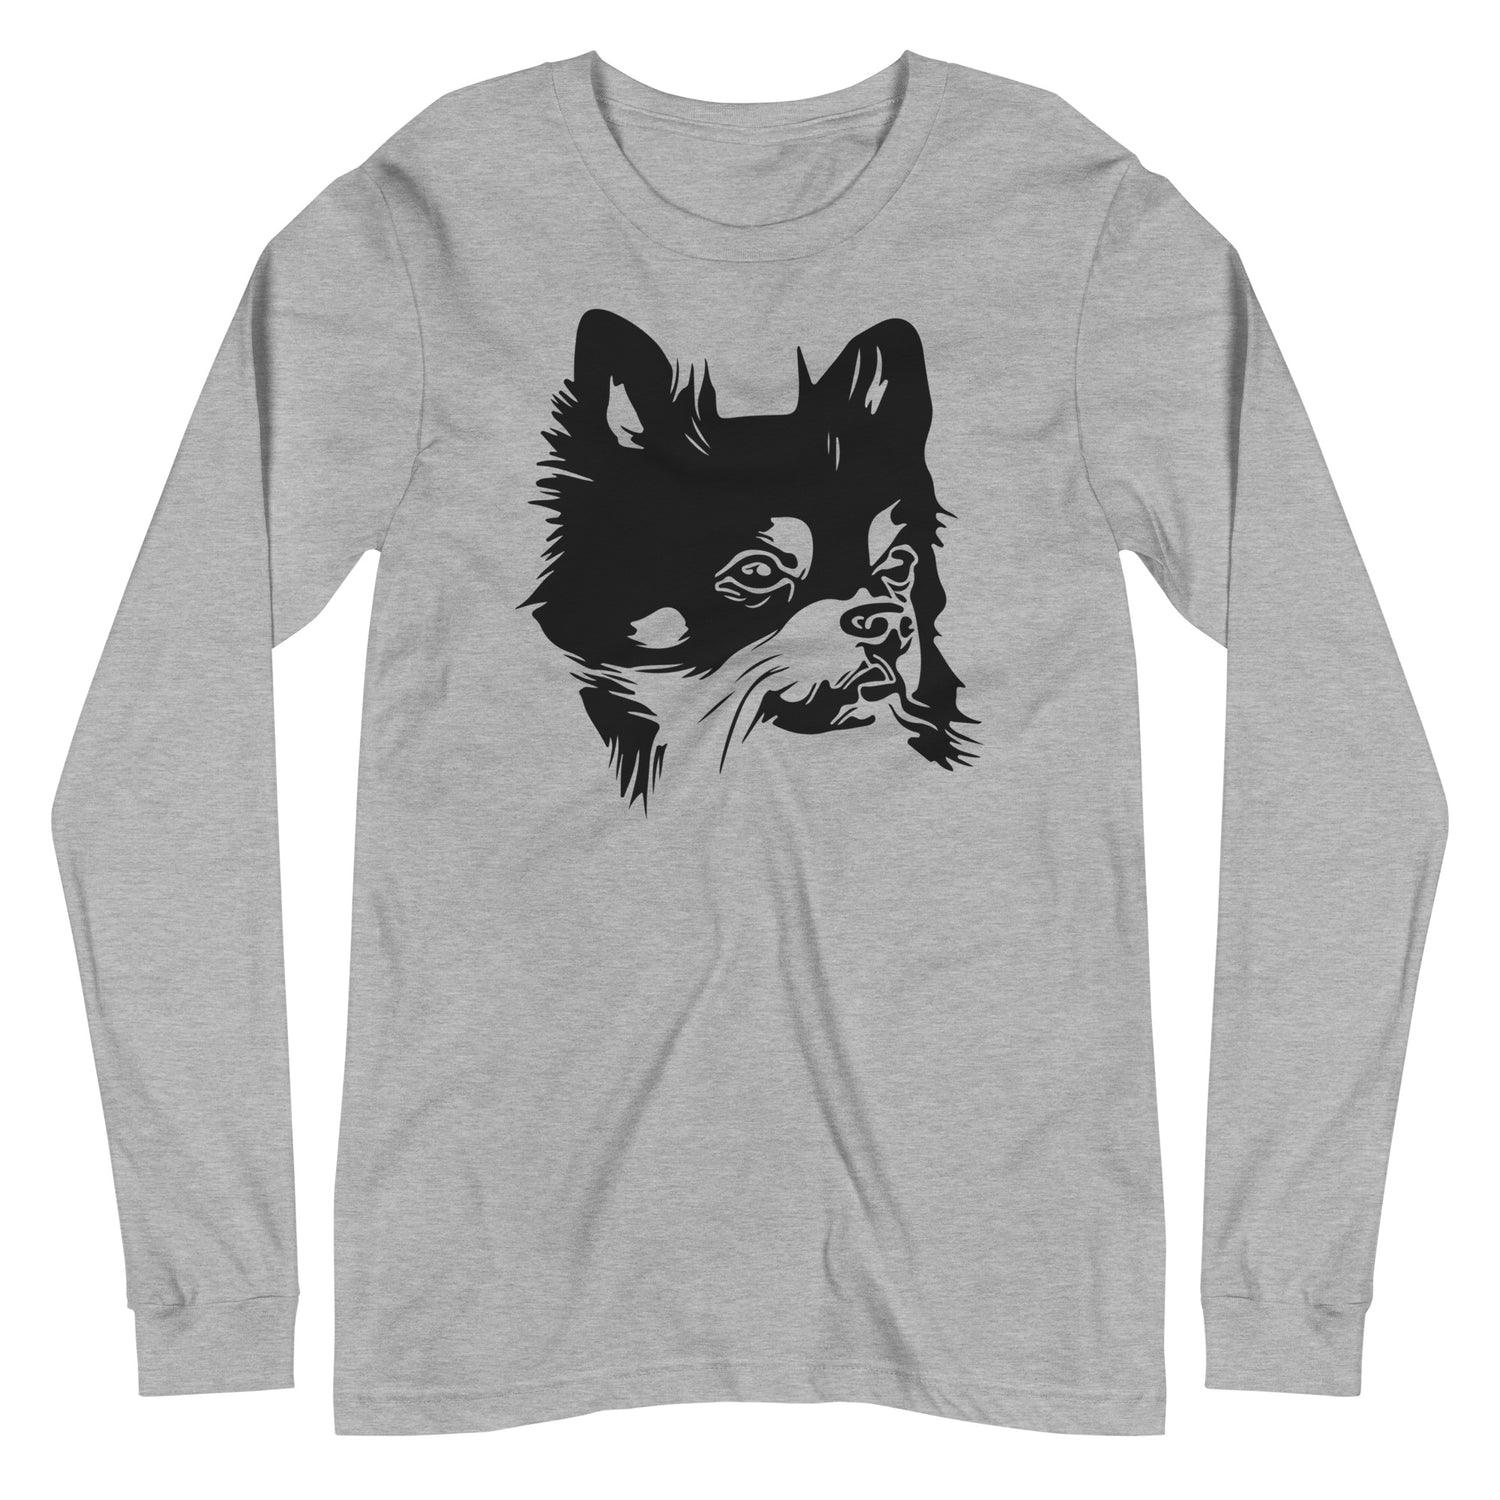 Black Chihuahua face silhouette looks sideways on unisex athletic heather long sleeve t-shirt